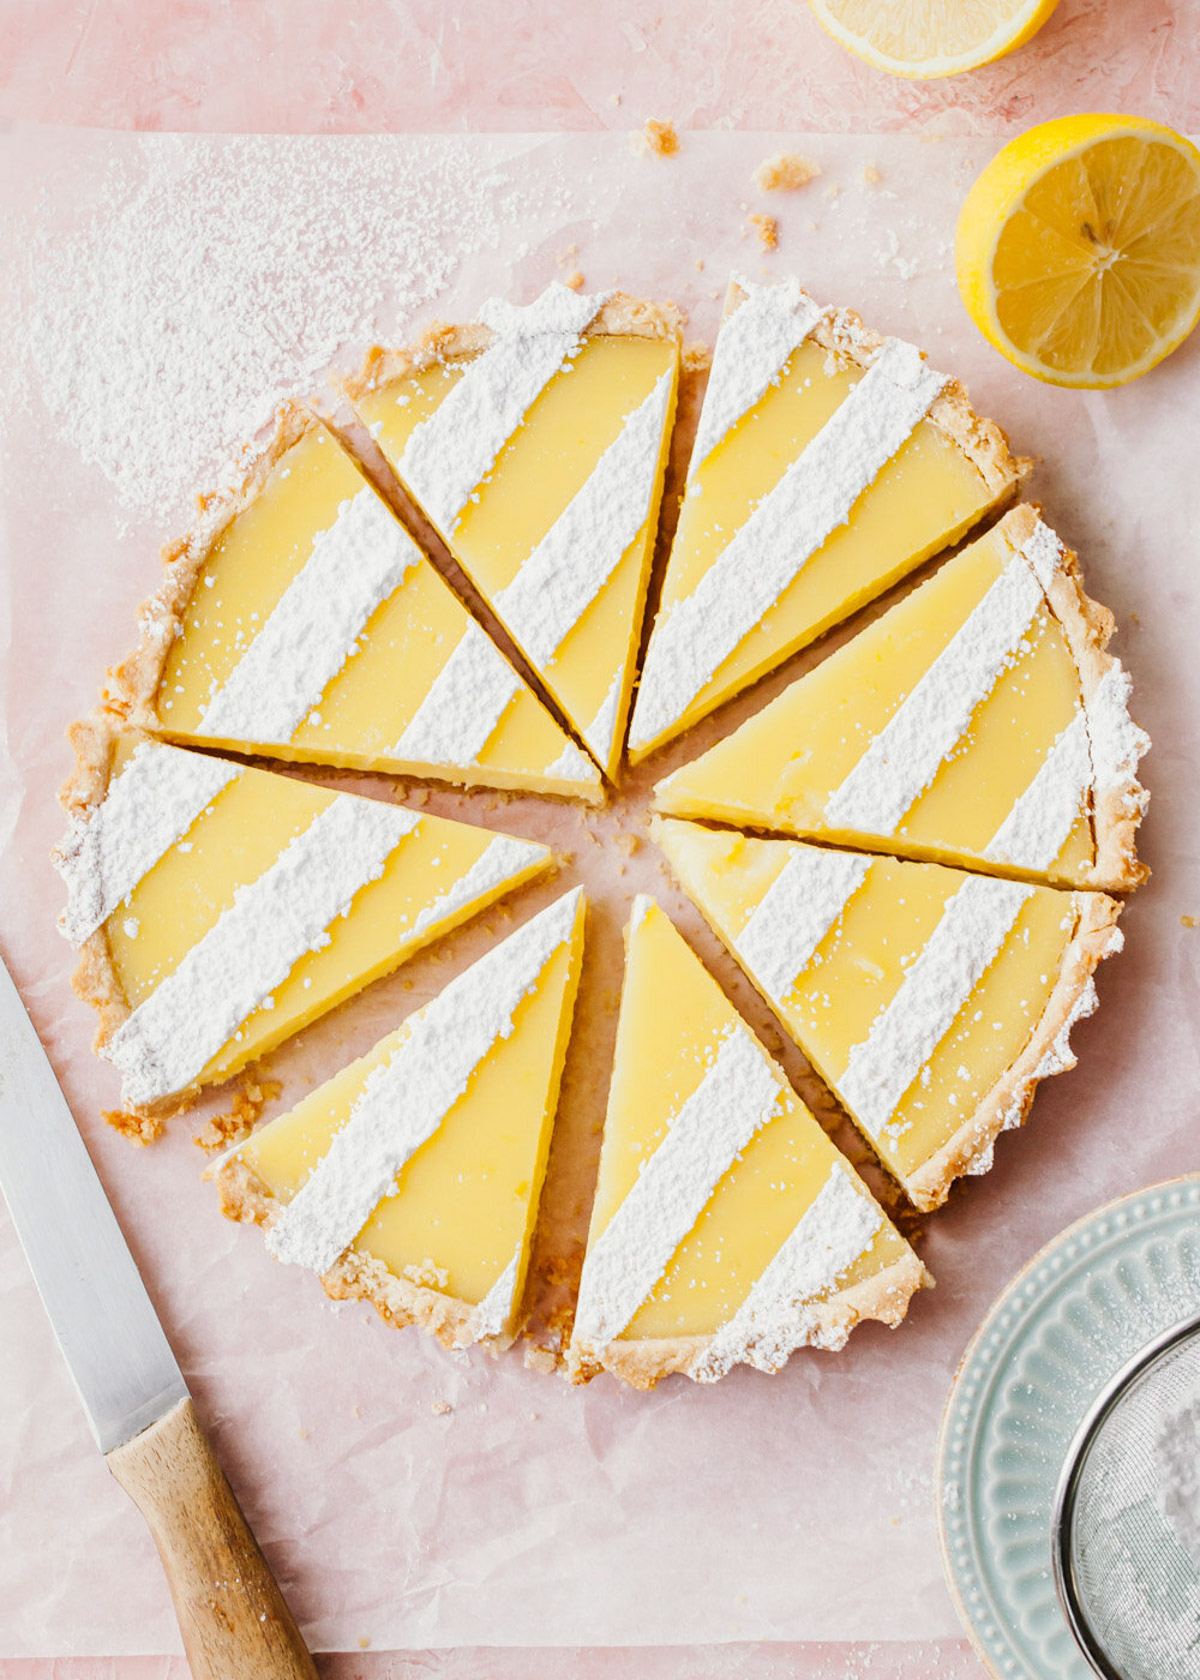 A lemon tart with confectioners' sugar dusted on top that has been sliced into wedges